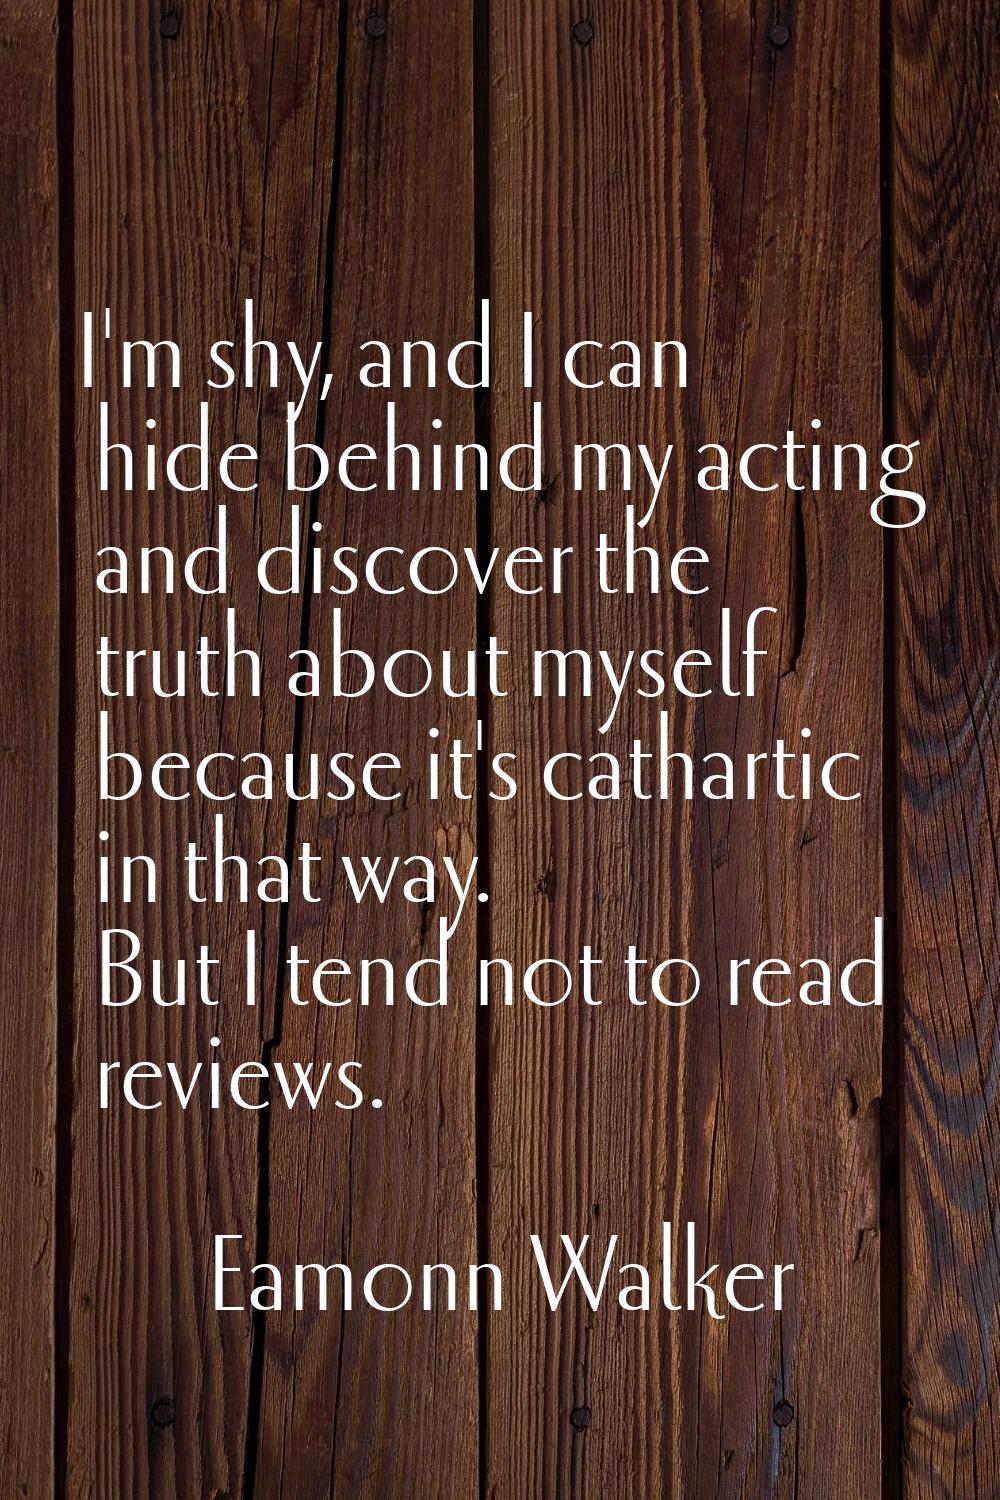 I'm shy, and I can hide behind my acting and discover the truth about myself because it's cathartic